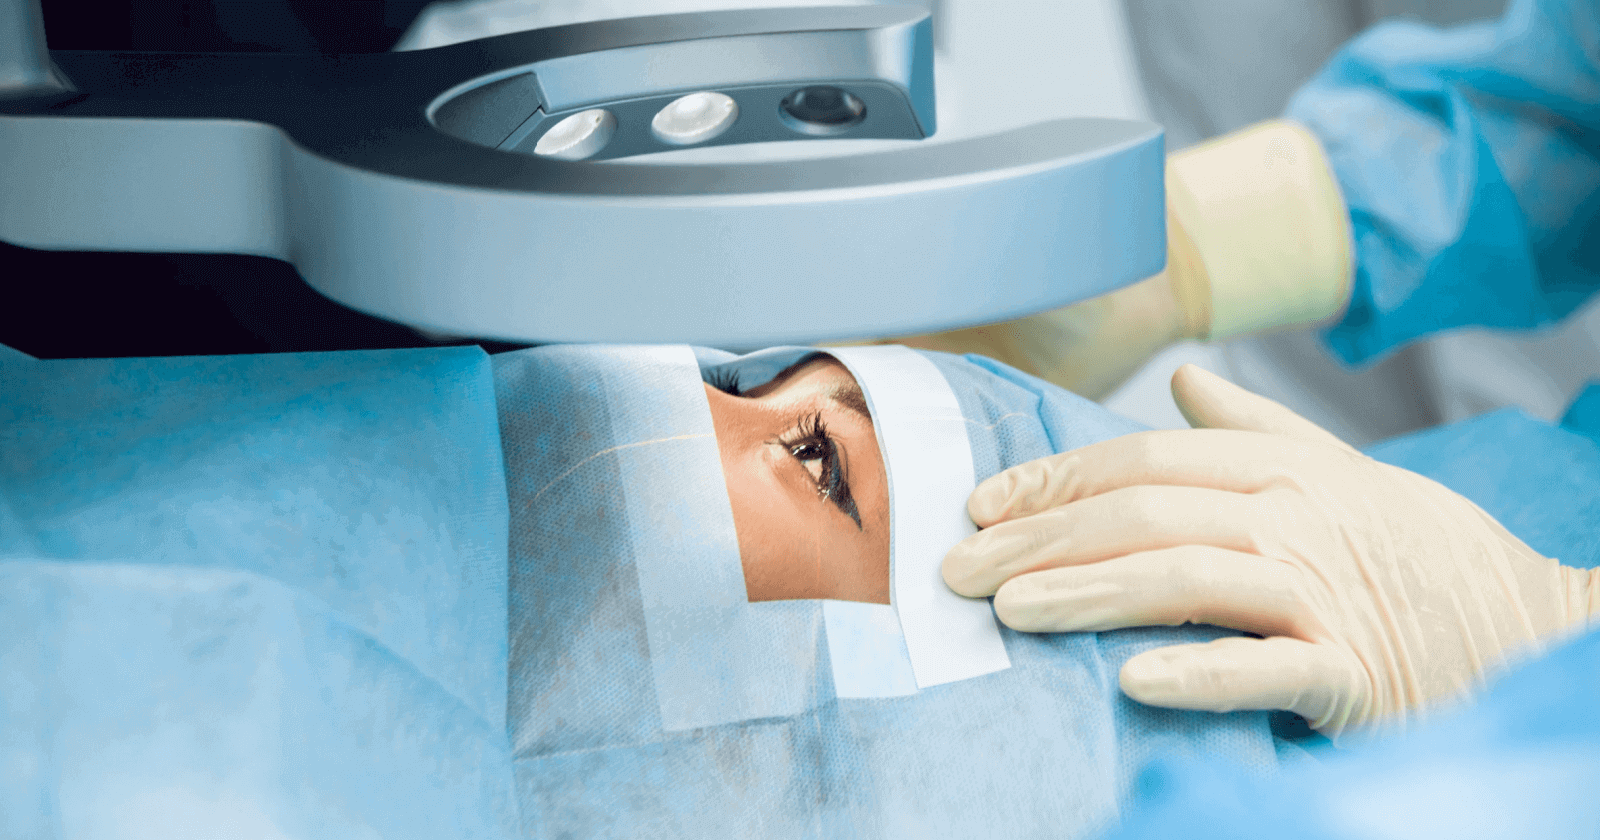 Ophthalmologic (Eye) Surgery: Meaning, scope, and other details